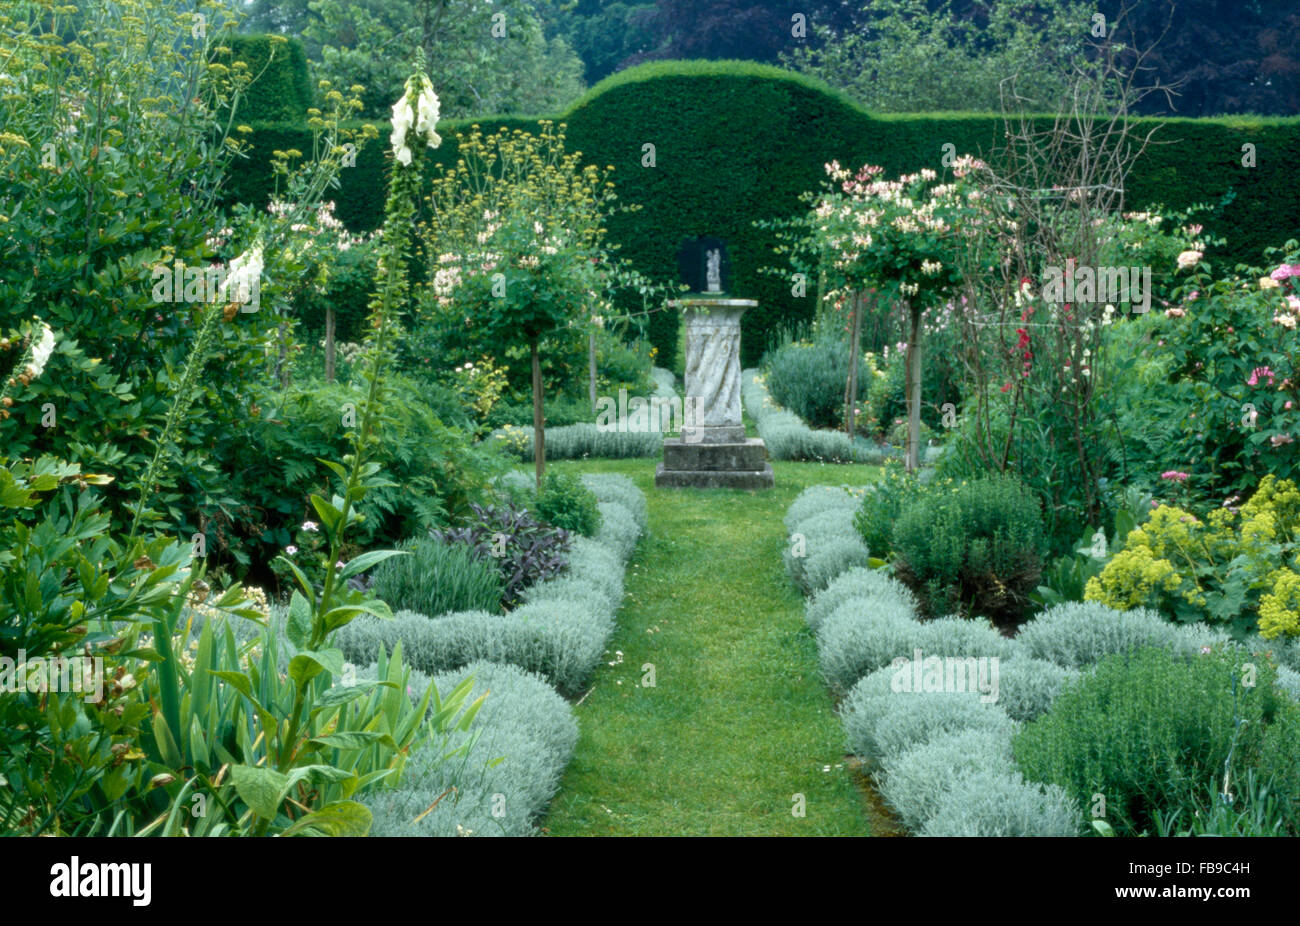 Pale gray santolina edging grass path in a large country garden with standard roses and white foxgloves Stock Photo